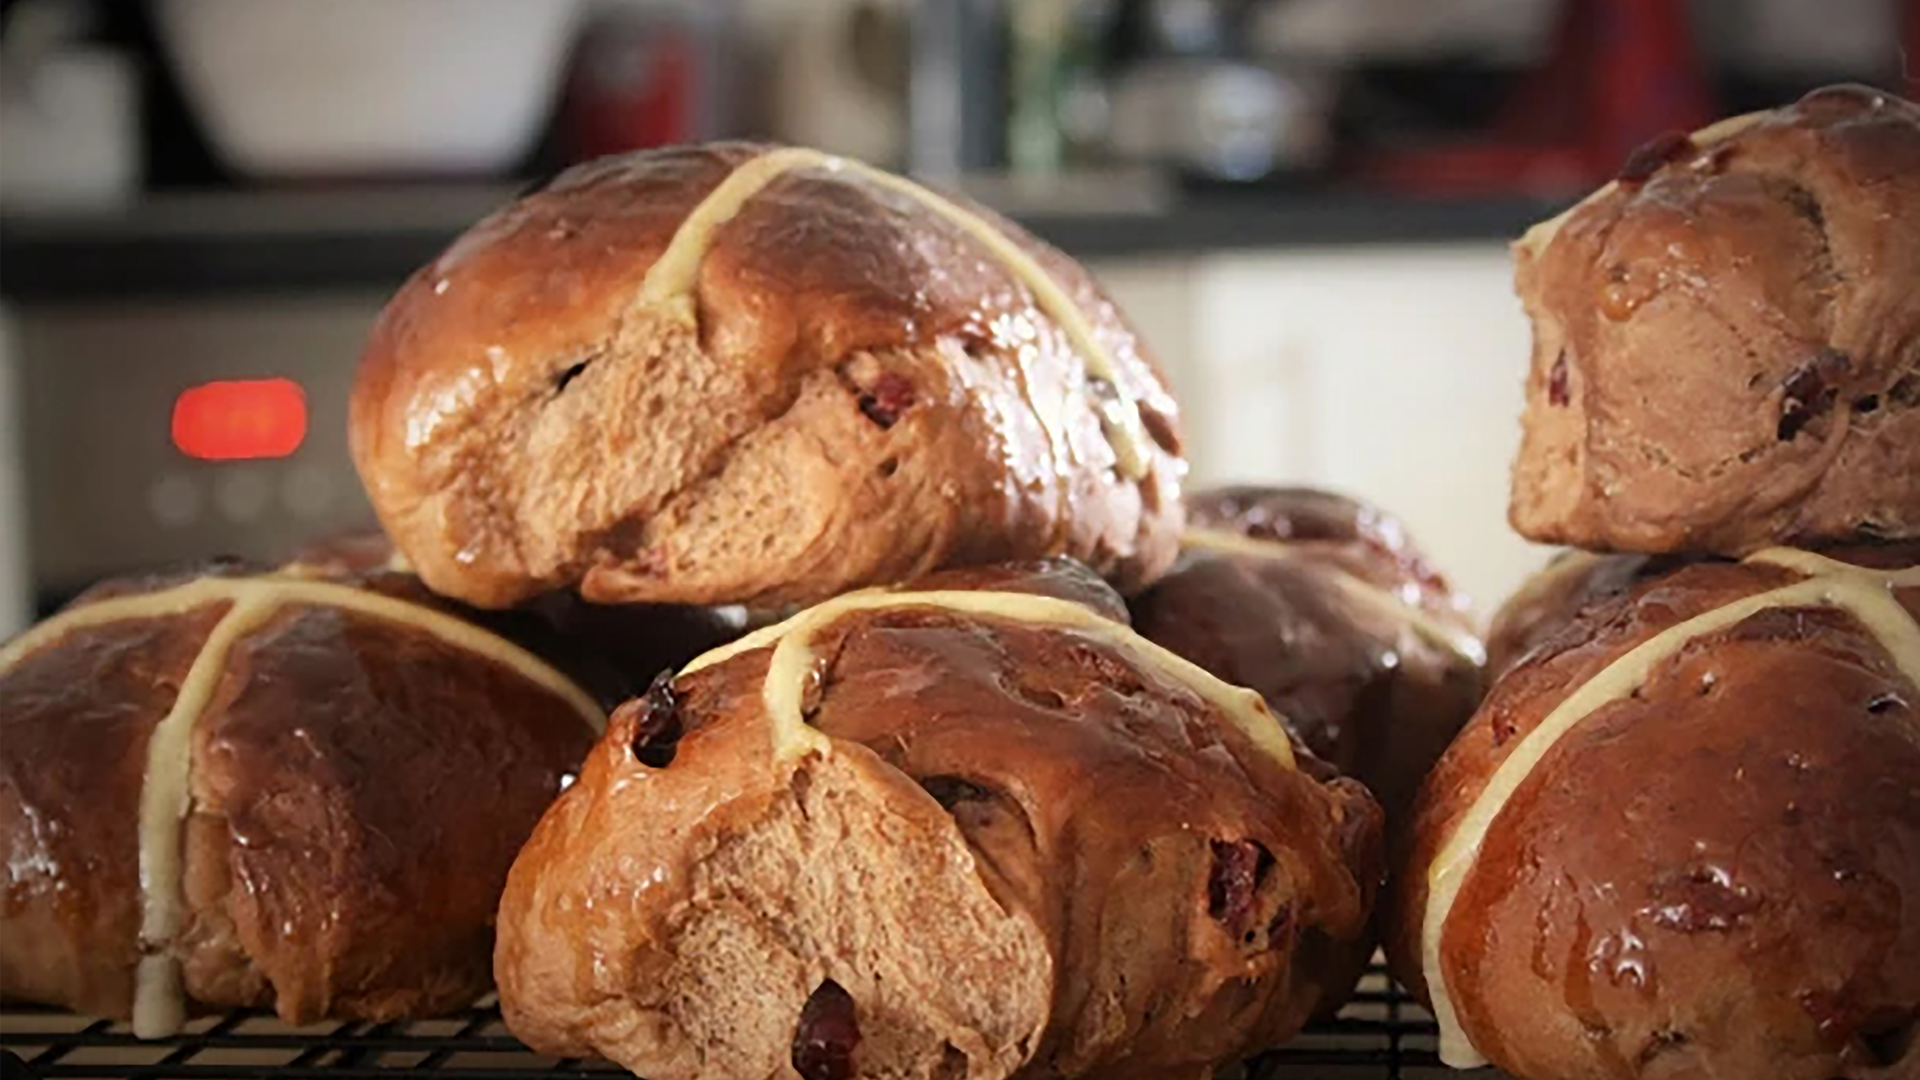 Pear, cranberry, and dark chocolate hot cross buns